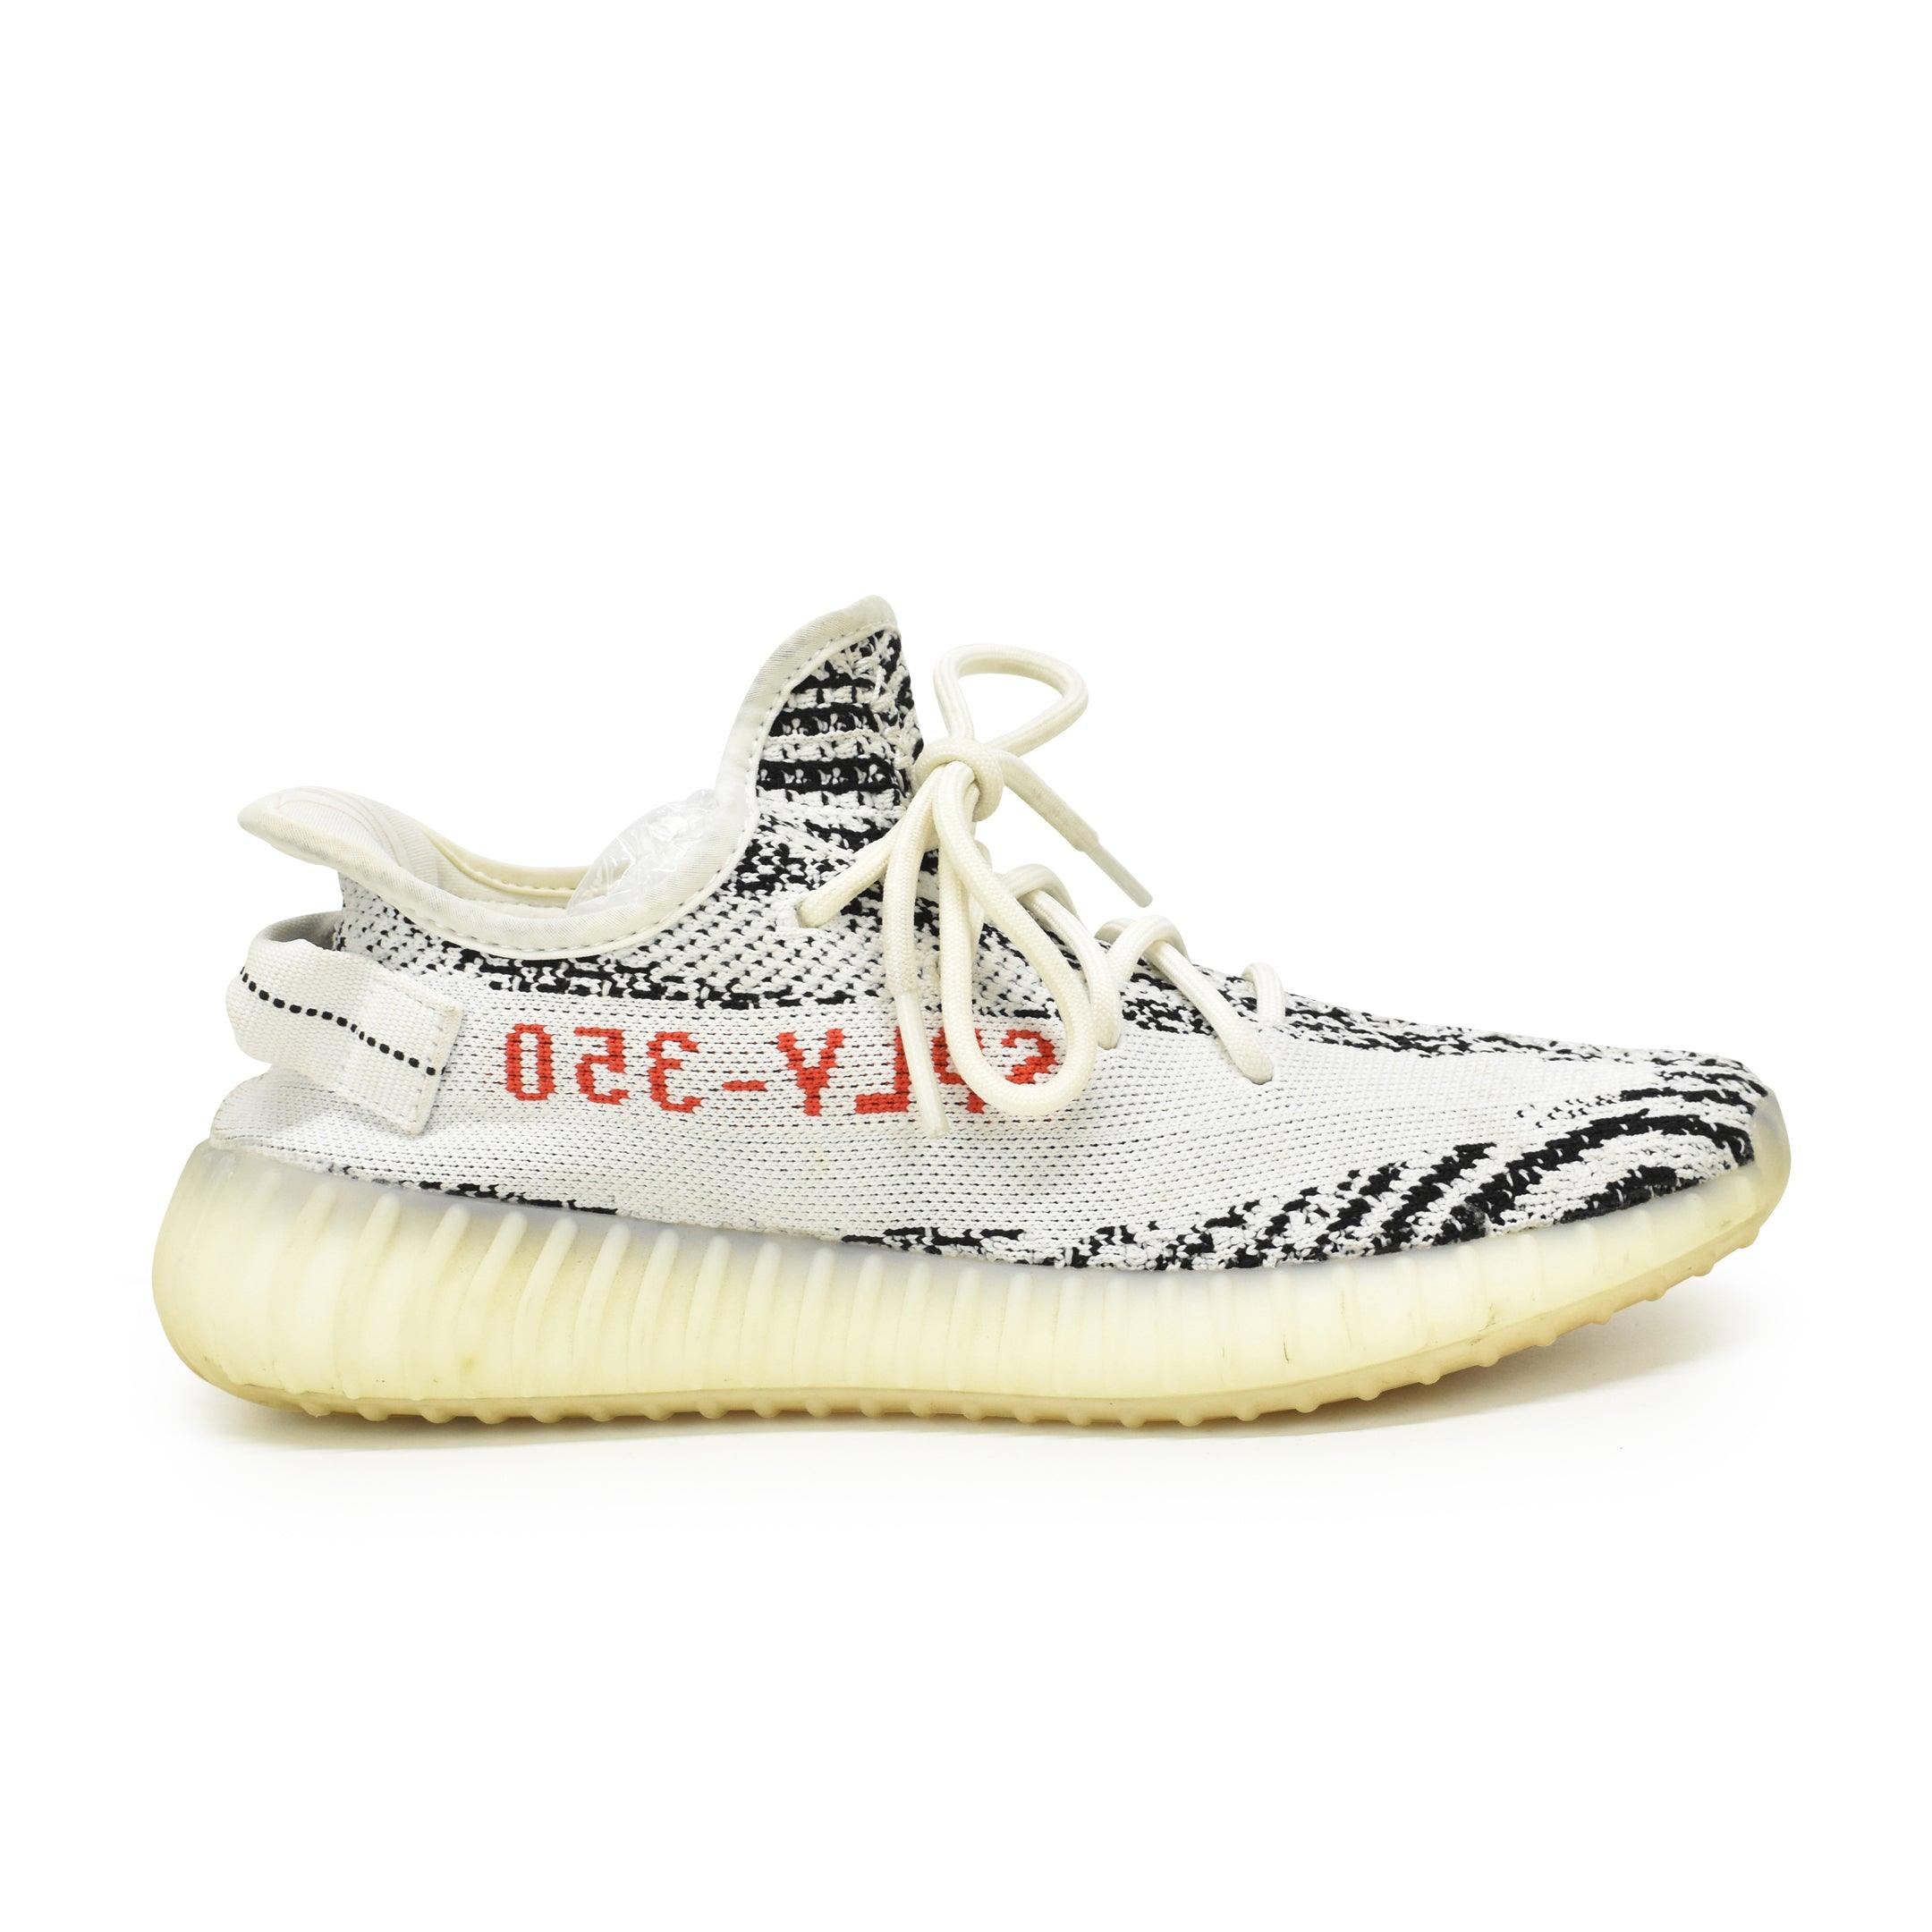 Adidas x Yeezy 'Boost 350 V2' Sneakers - Men's 8.5 - Fashionably Yours